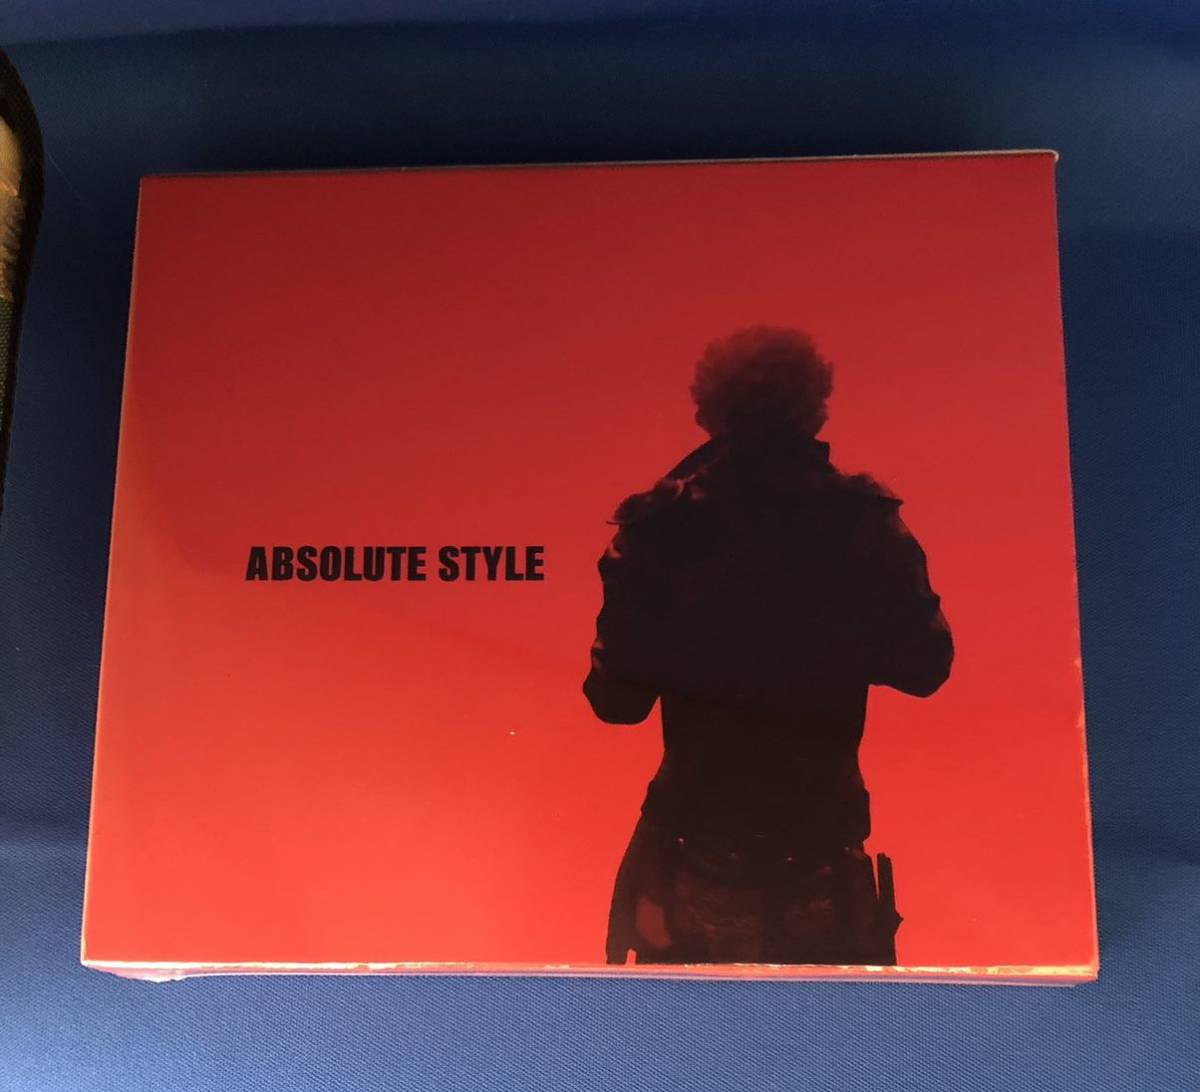 STRONG STYLE BESTアルバム　『ABSOLUTE STYLE』 CD +DVD2枚組　限定1000枚　未開封新品　ストロングスタイル_画像1